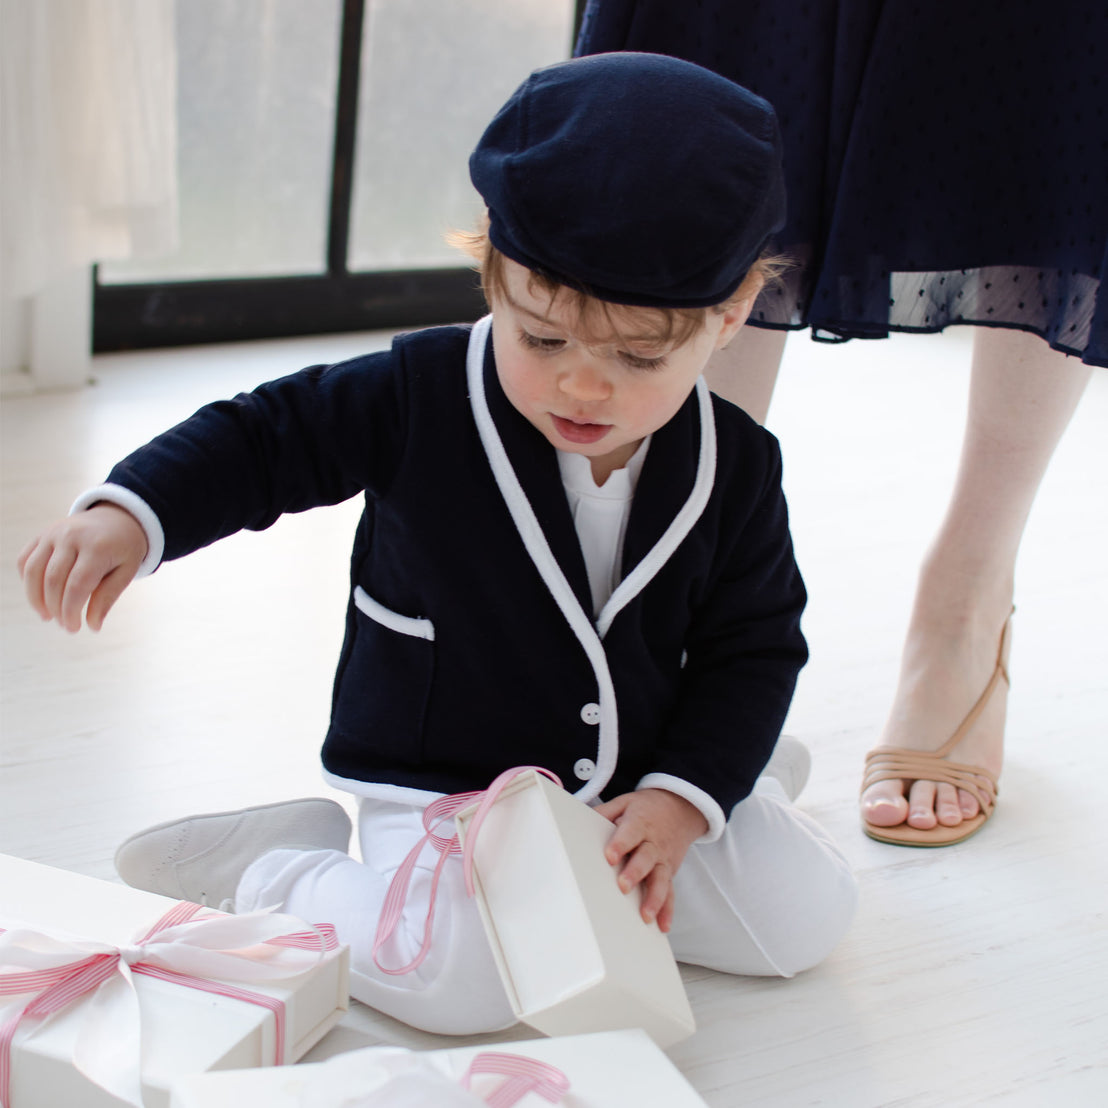  He is wearing the Elliott 3-Piece Suit, including jacket, pants, and onesie (and matching newsboy cap).